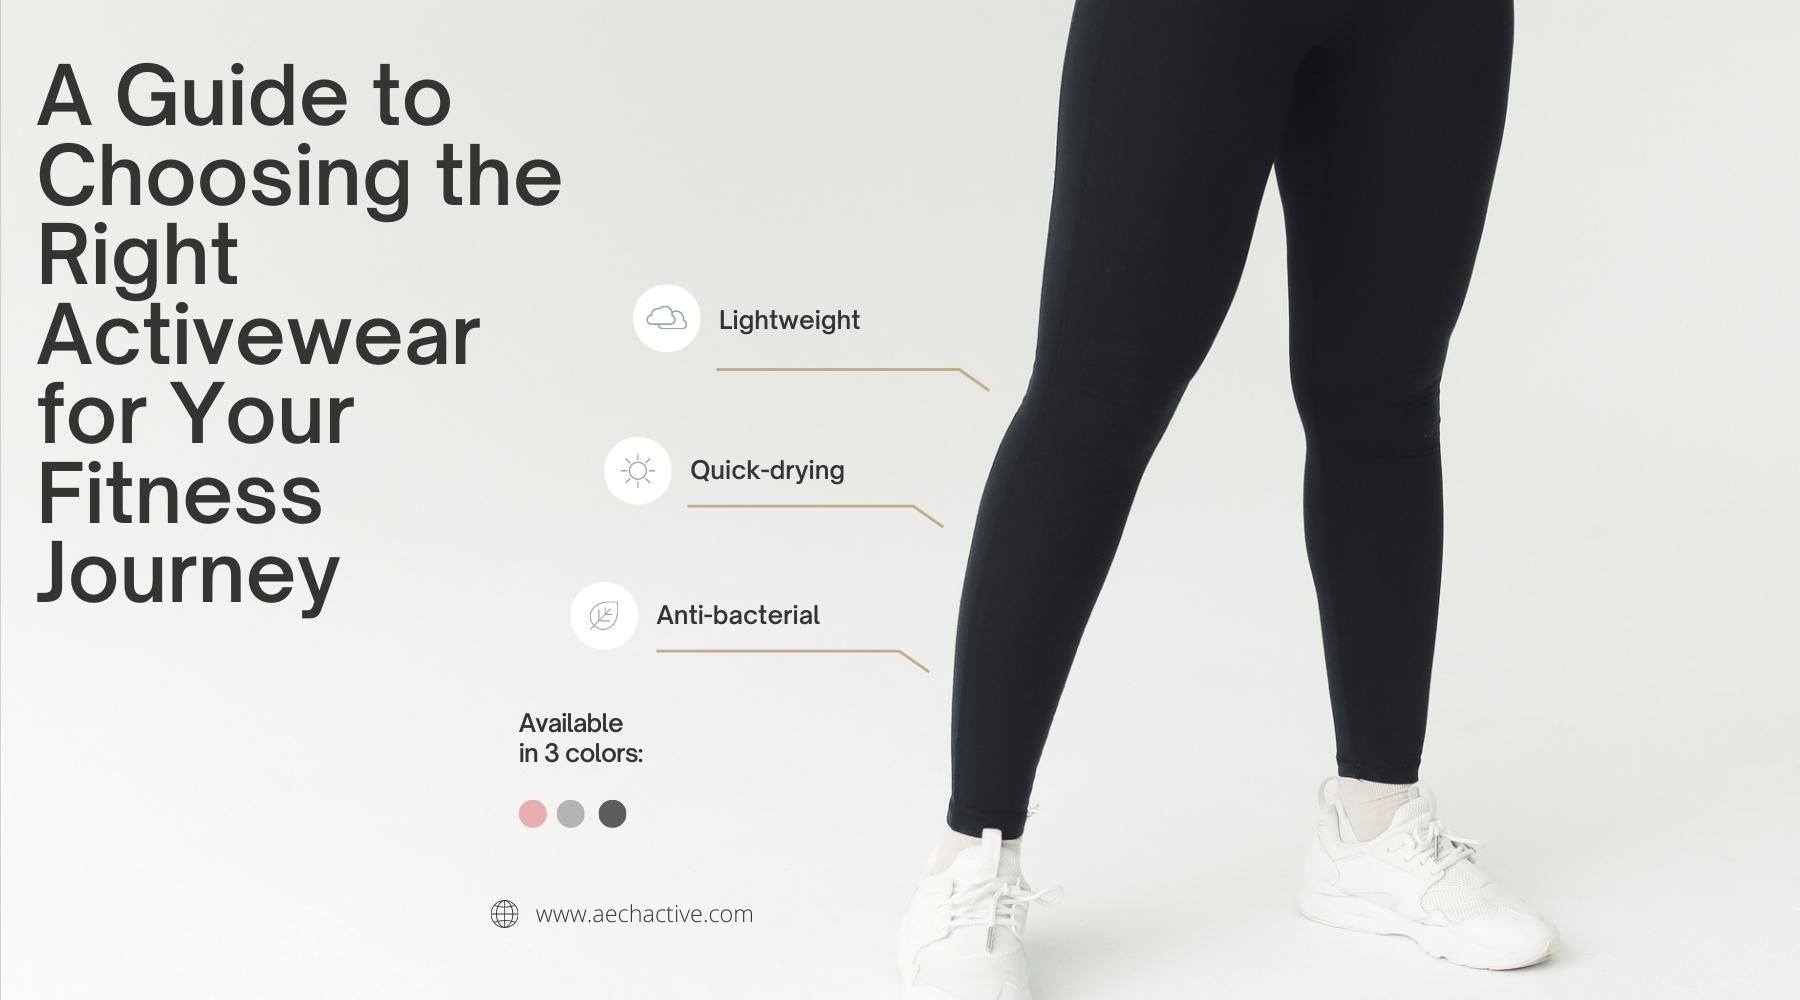 A Guide to Choosing the Right Activewear for Your Fitness Journey